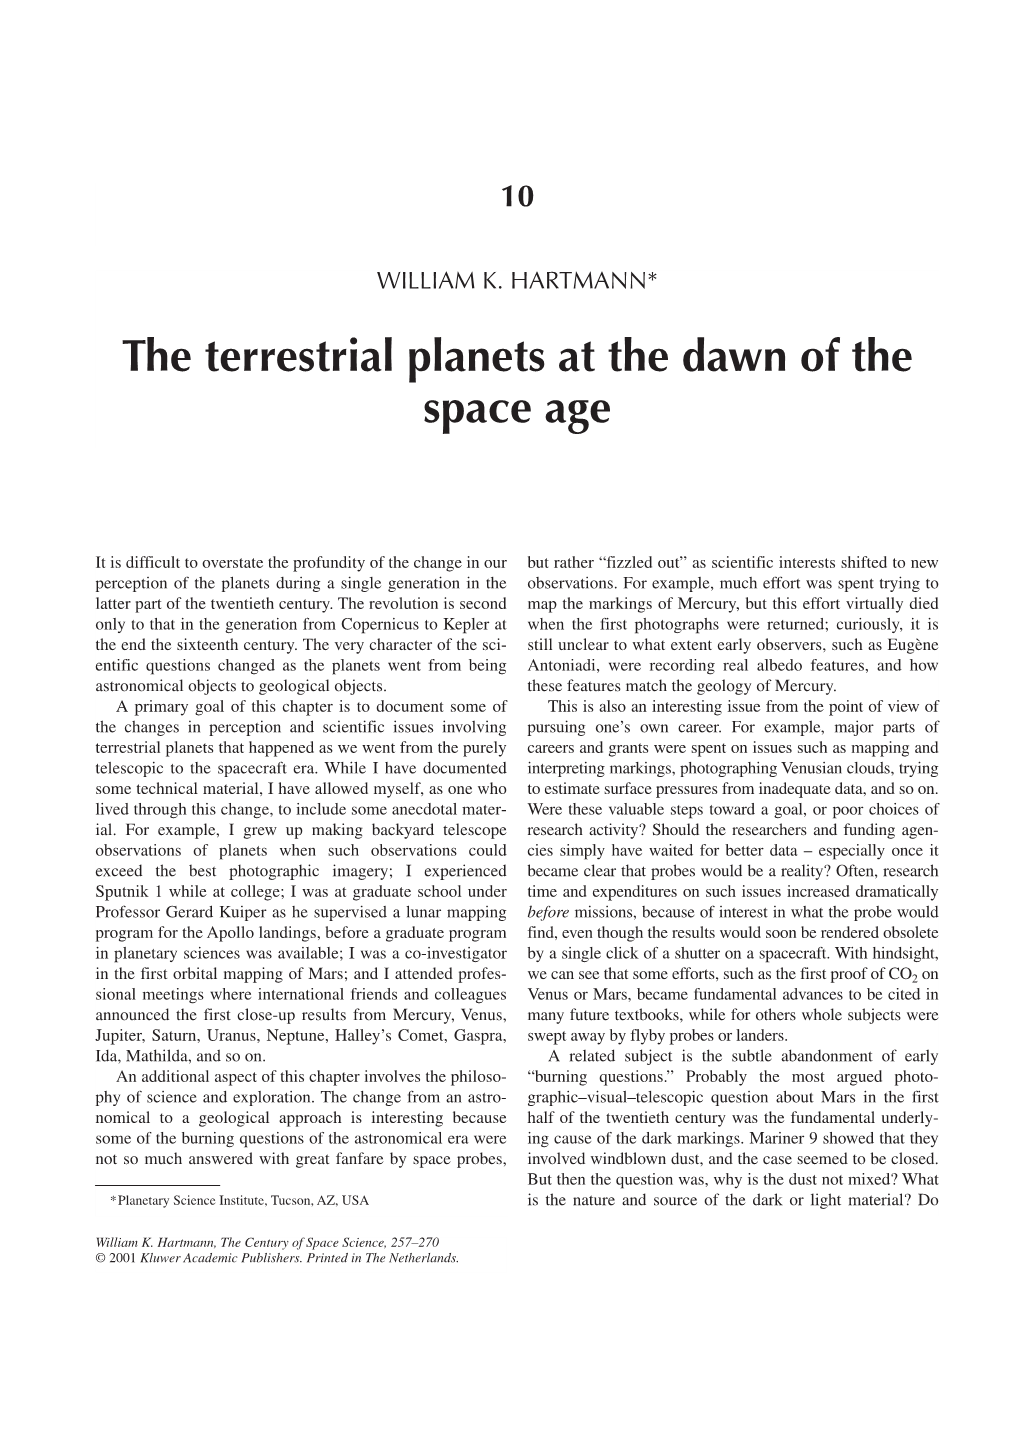 The Terrestrial Planets at the Dawn of the Space Age